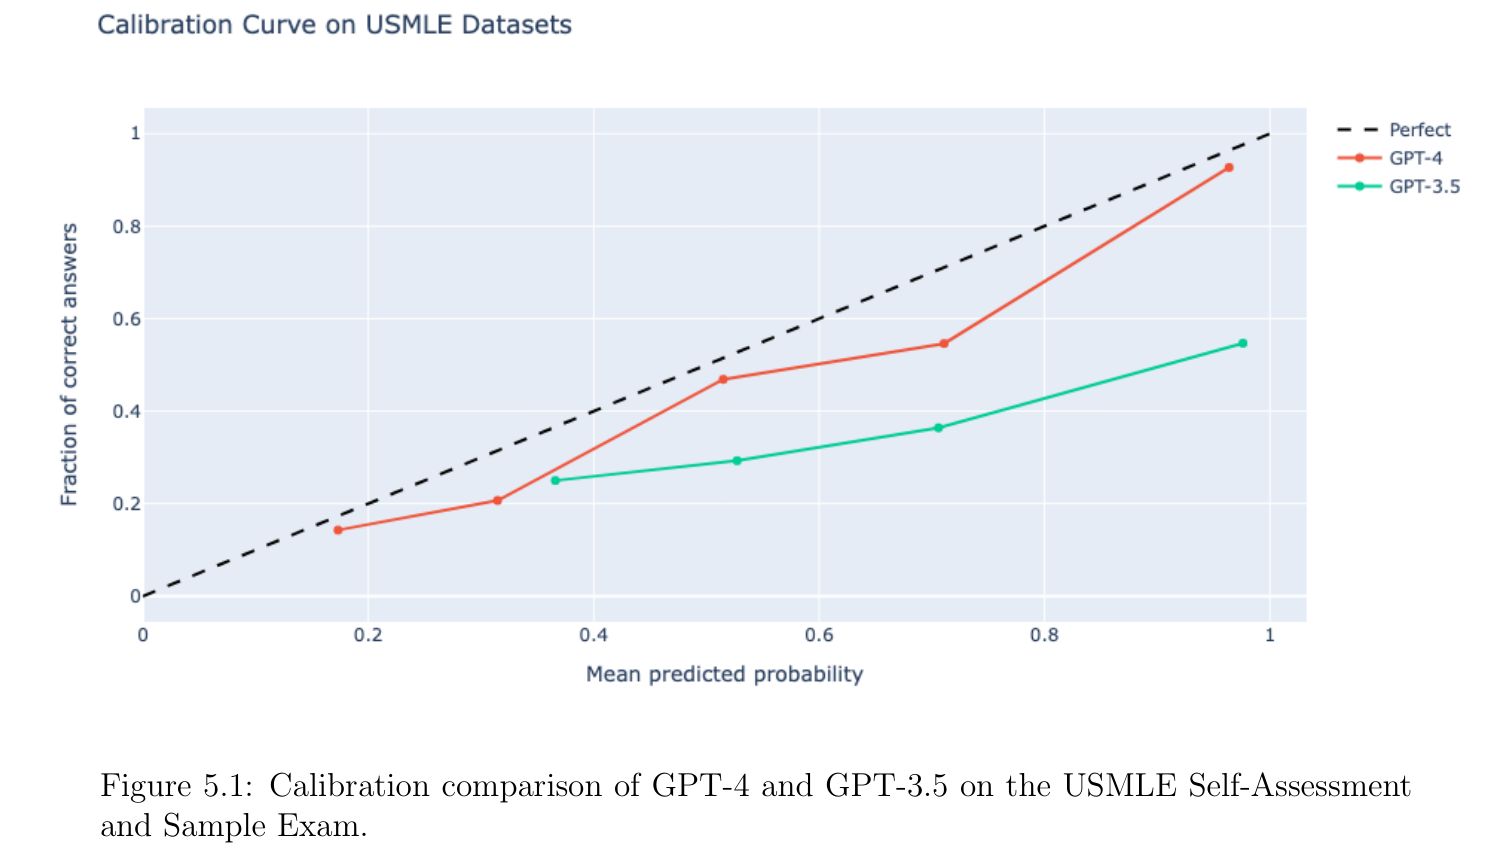 Figure 5.1: Calibration comparison of GPT-4 and GPT-3.5 on the USMLE Self-Assessment and Sample Exam.